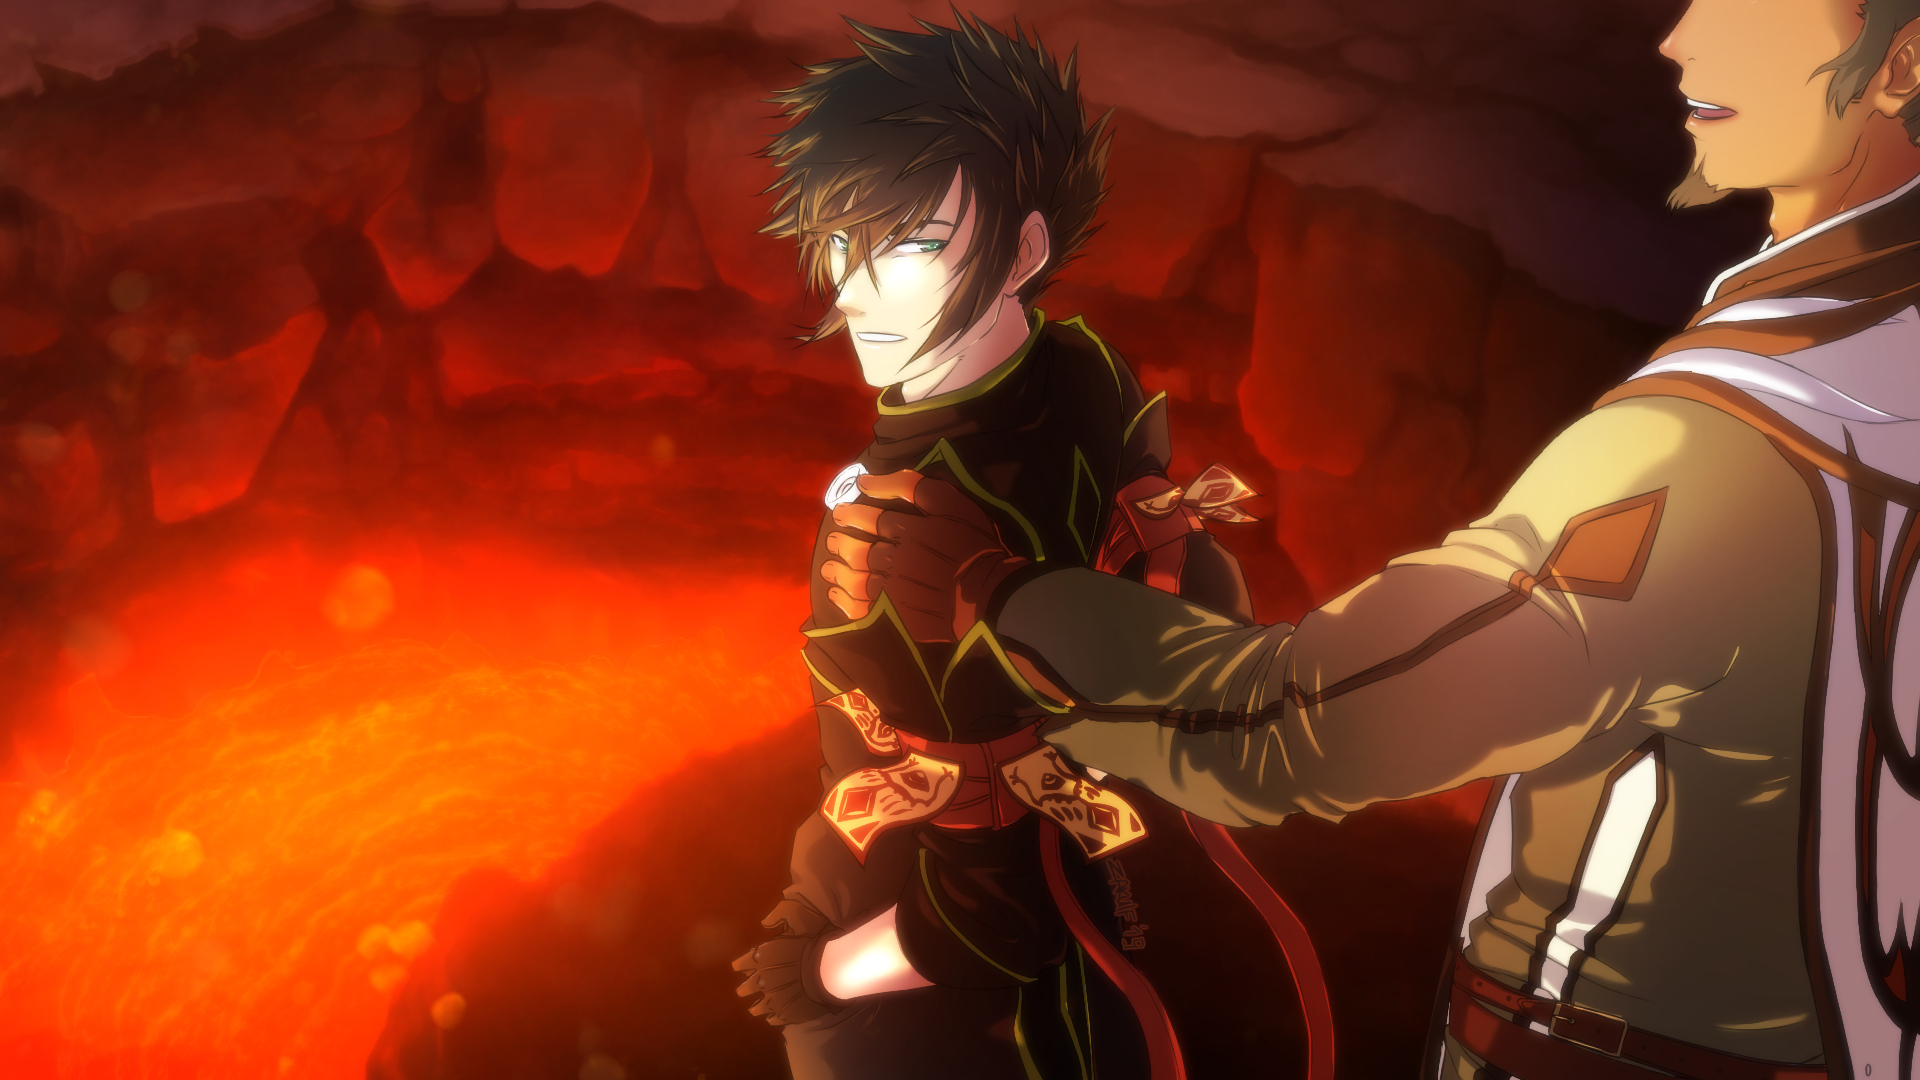 1920x1080 Tales of the Abyss Tales of Series Main Games Wallpaper #2737705 Zerochan Anime Image Board